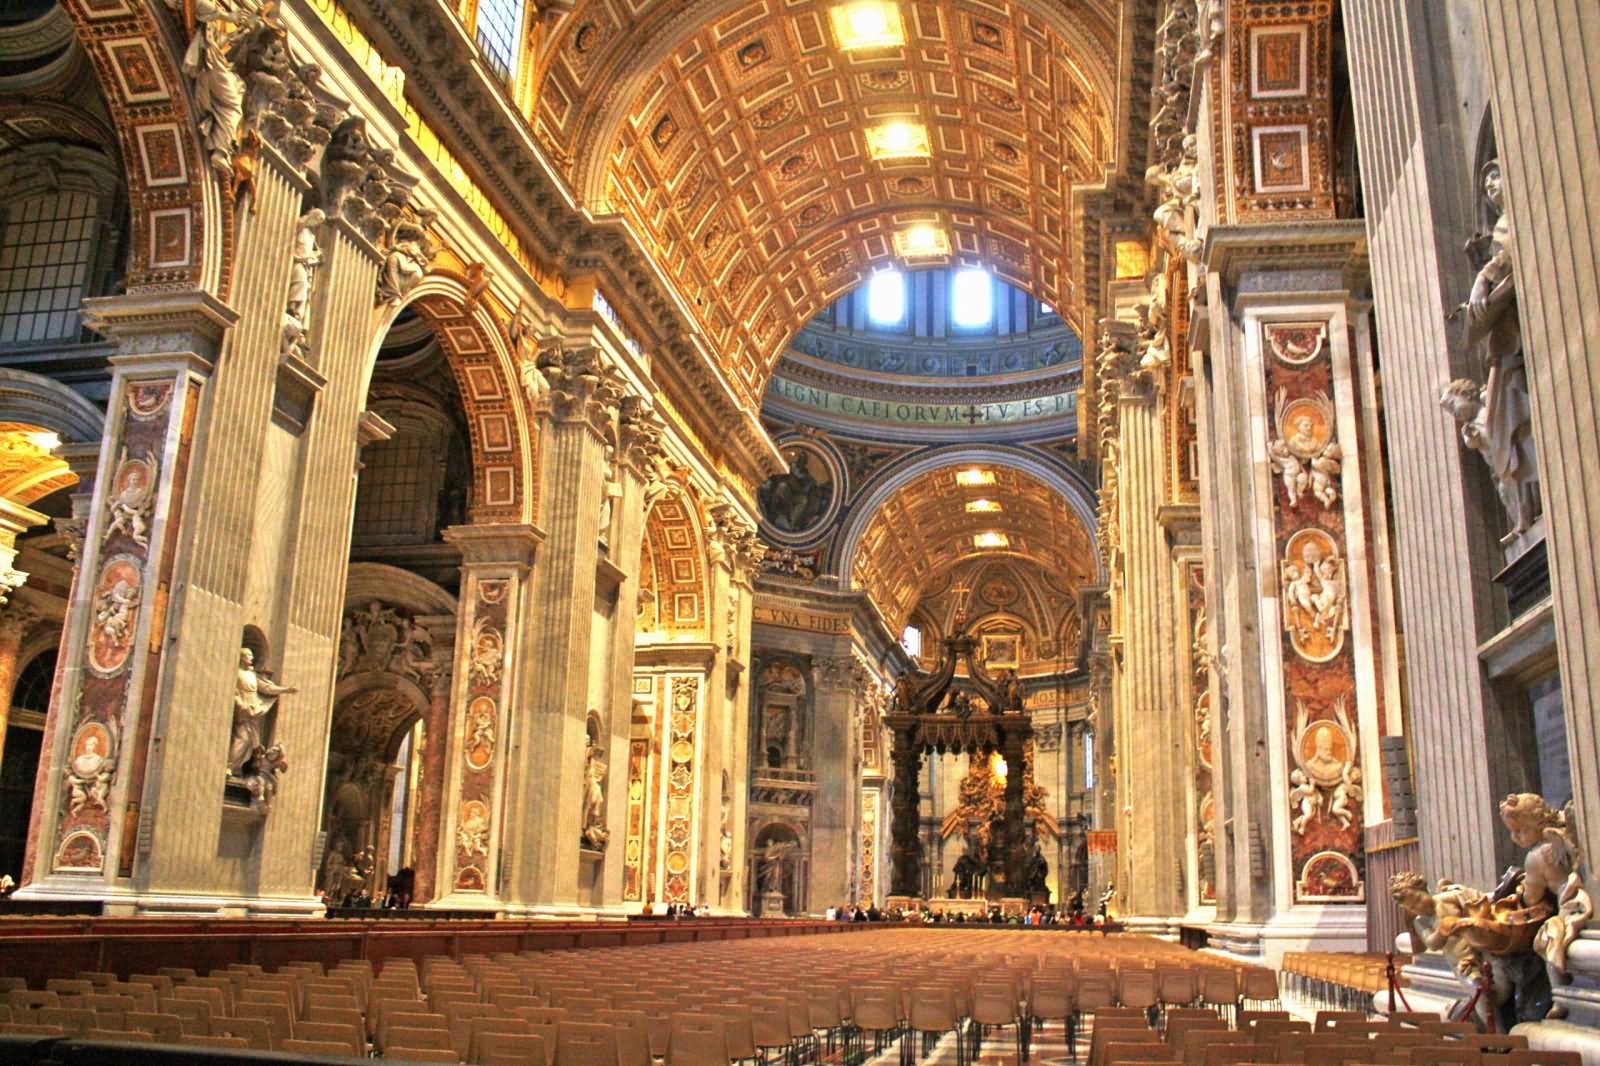 Inside View Of St. Peter's Basilica